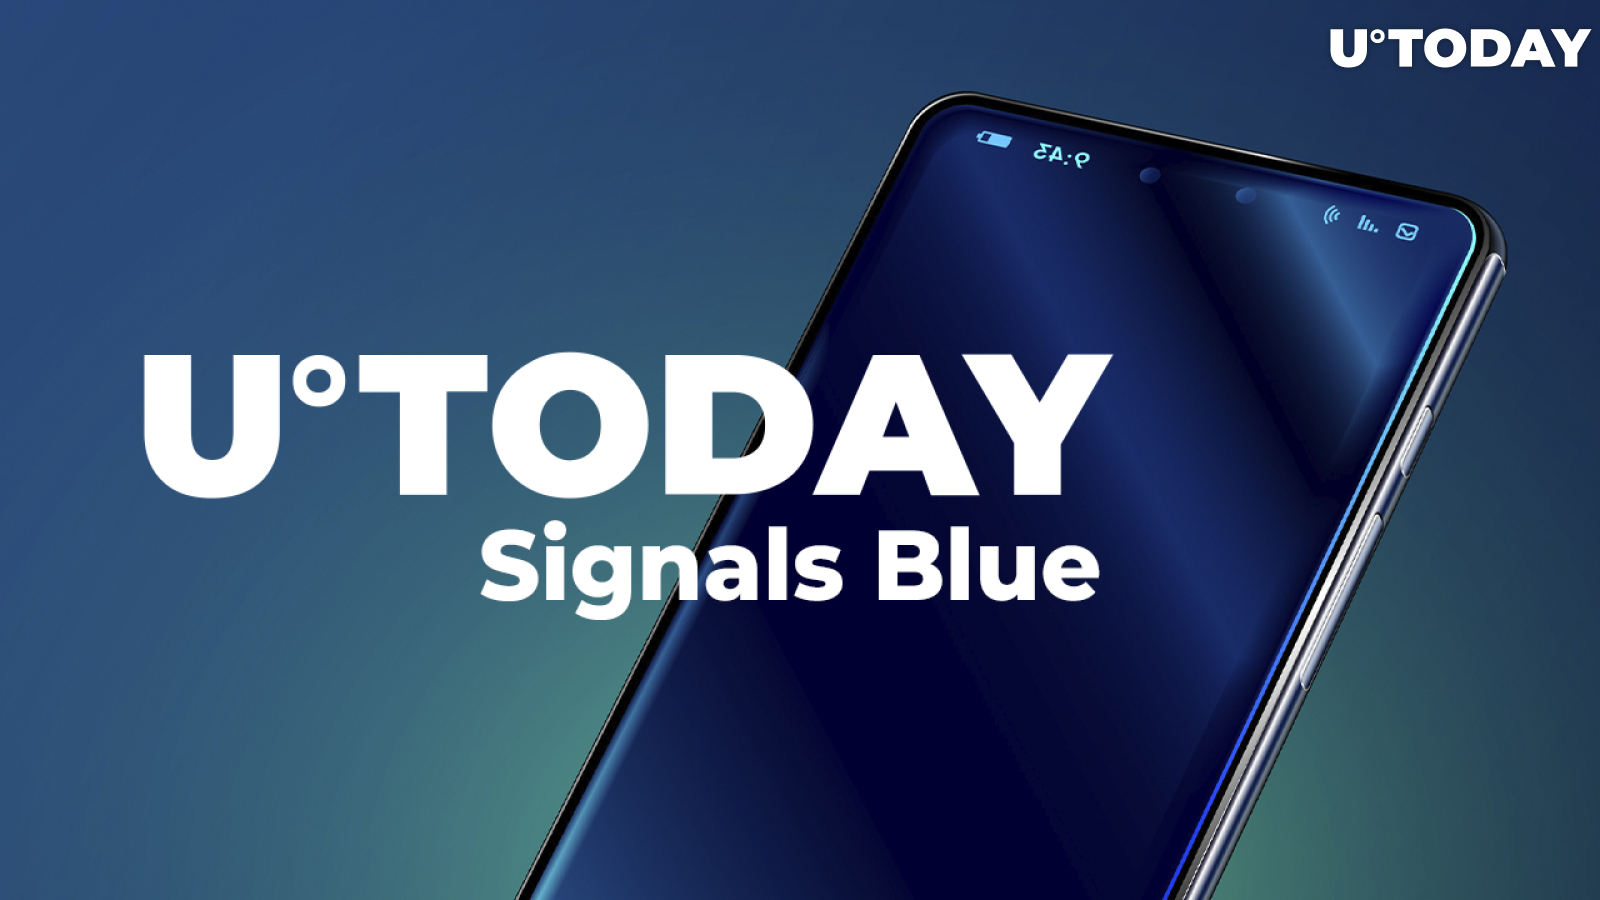 You Can Now Find U.Today News and Articles on Signals Blue Channel